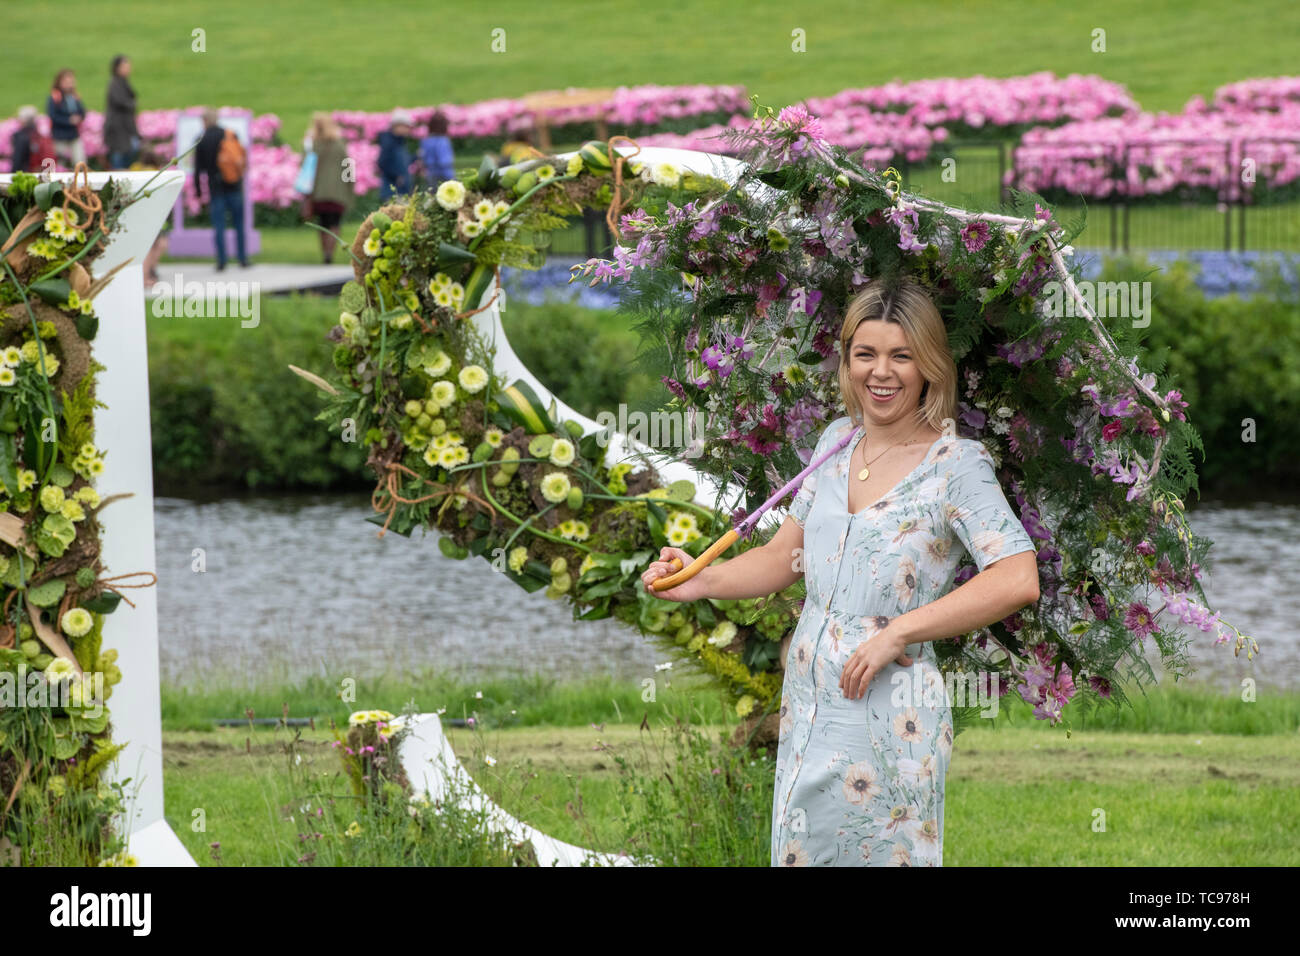 Woman with a floral parasol at RHS Chatsworth flower show 2019. Chatsworth, Bakewell, Derbyshire, UK Stock Photo